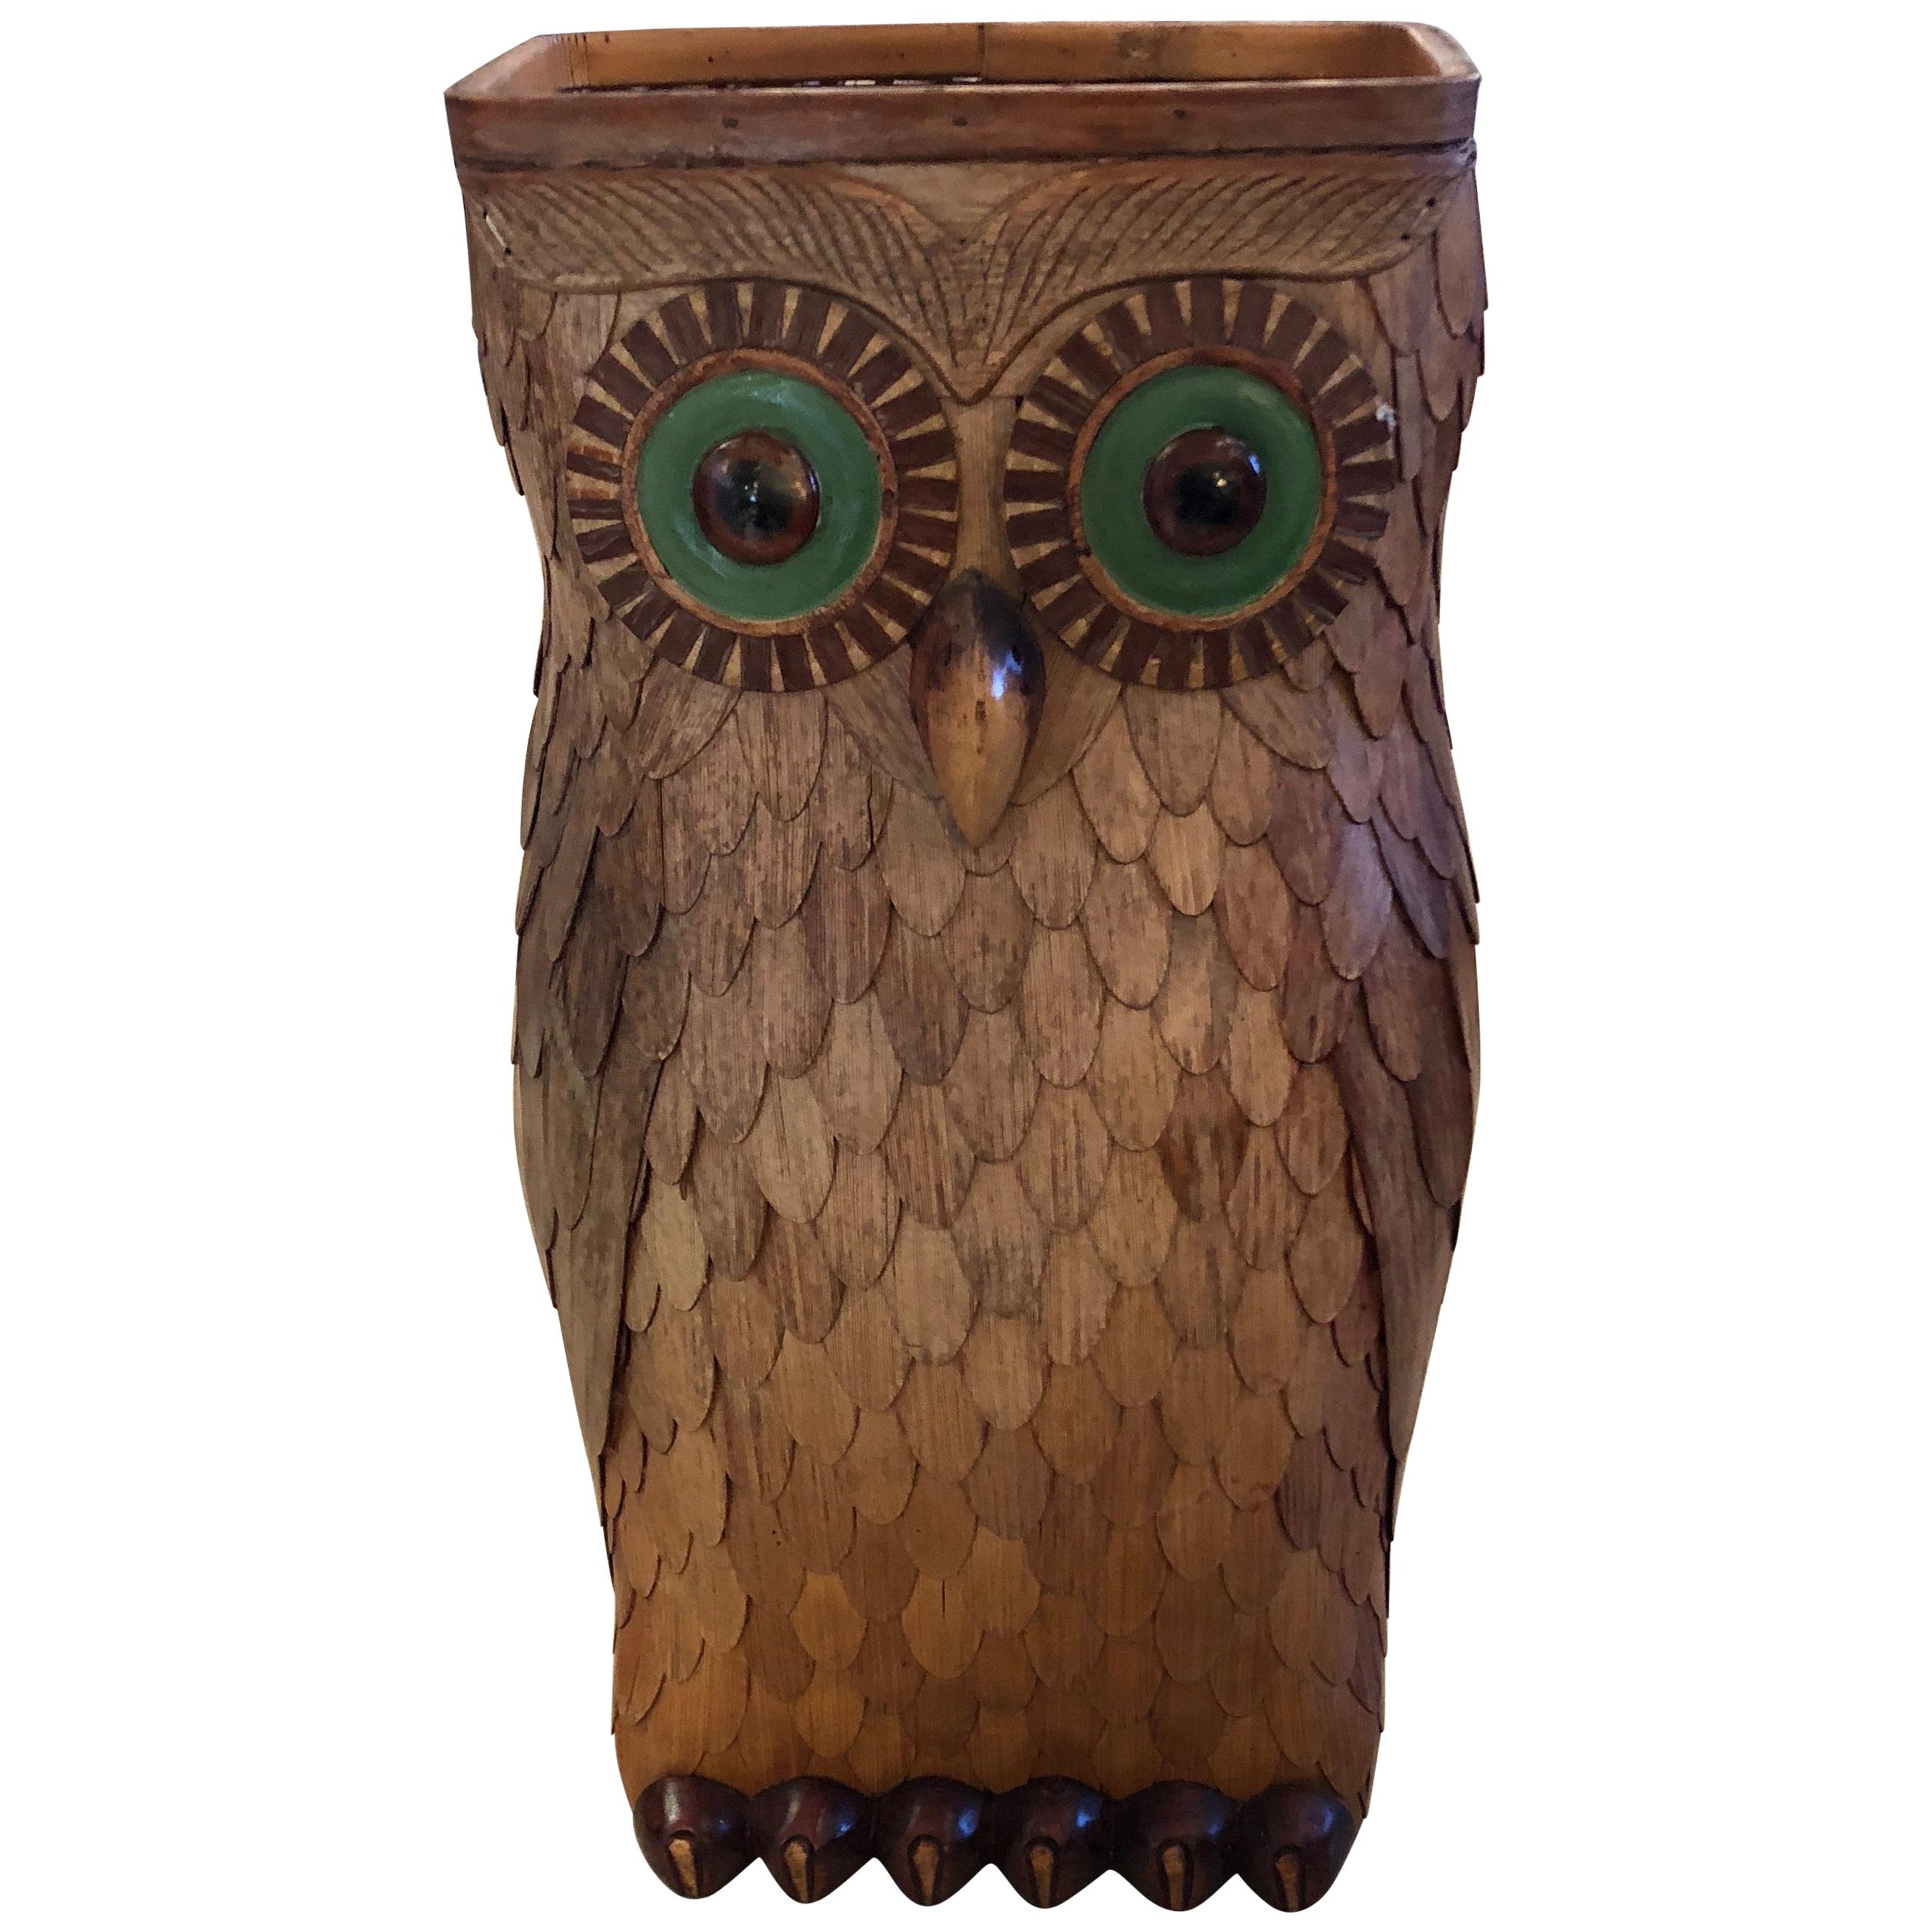 Delightful and Large Wooden Owl Vessel with Glass Eyes